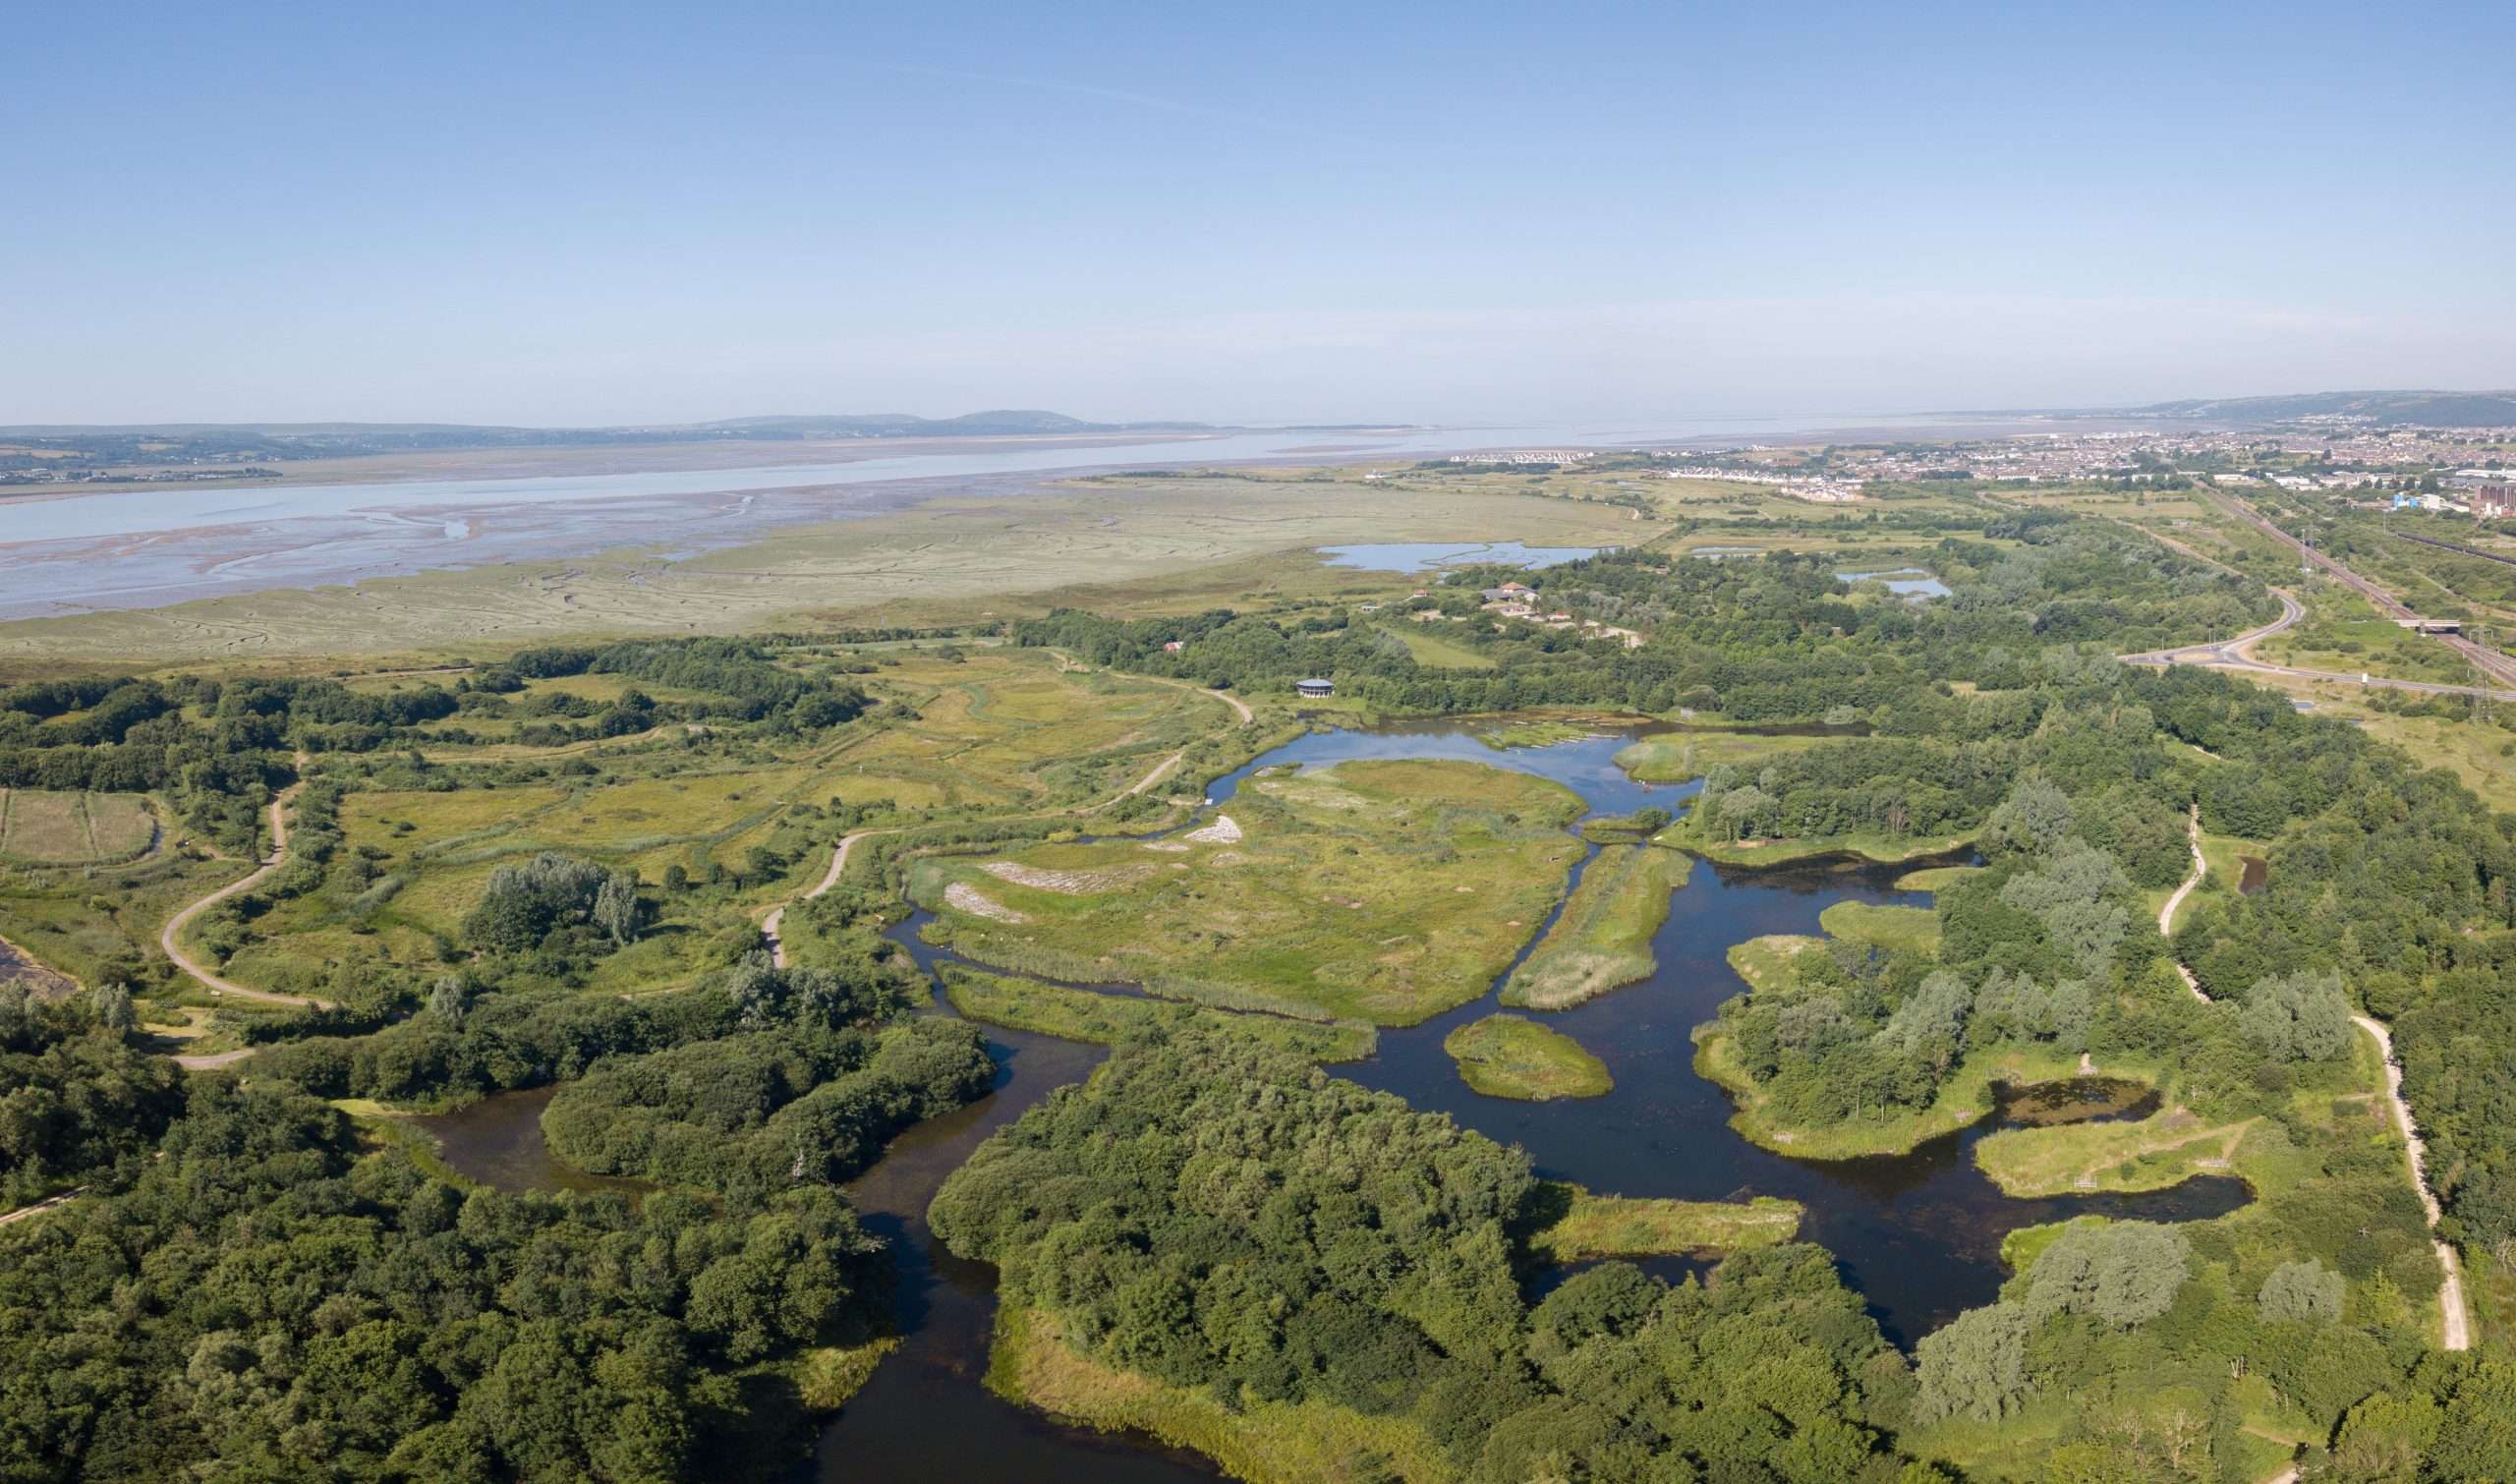 Wetland centre plans for visitor accommodation turned down